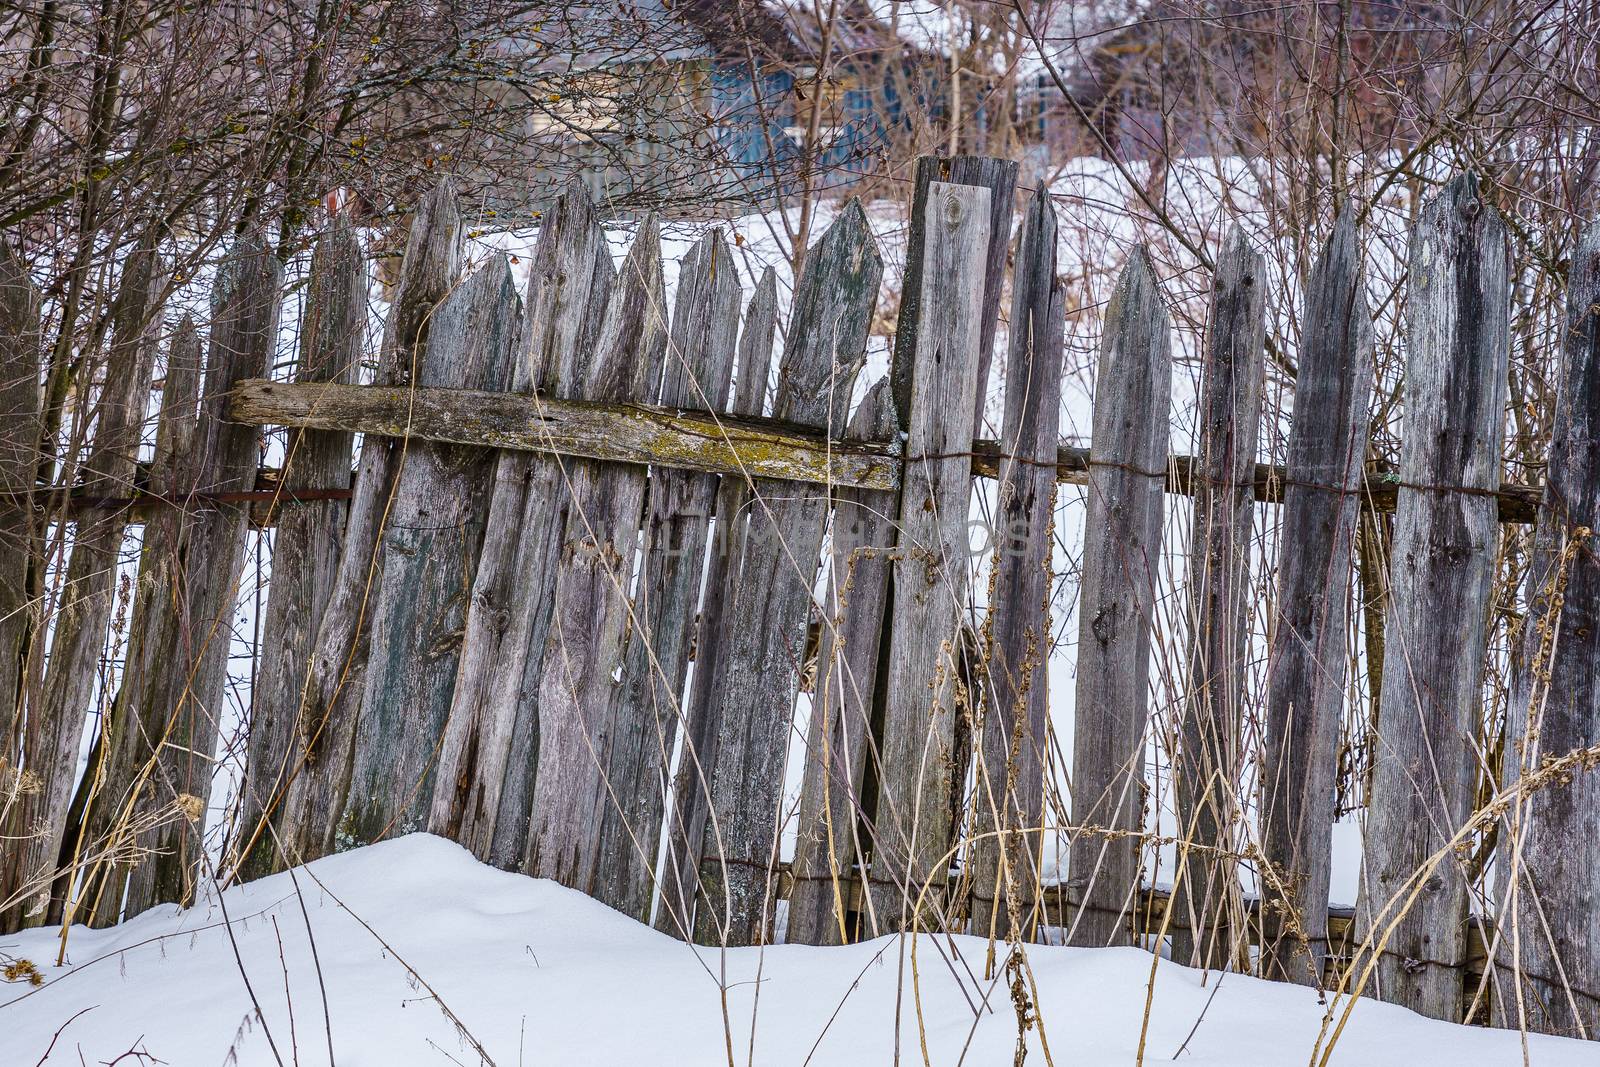 fence around the garden of nailing boards by VADIM